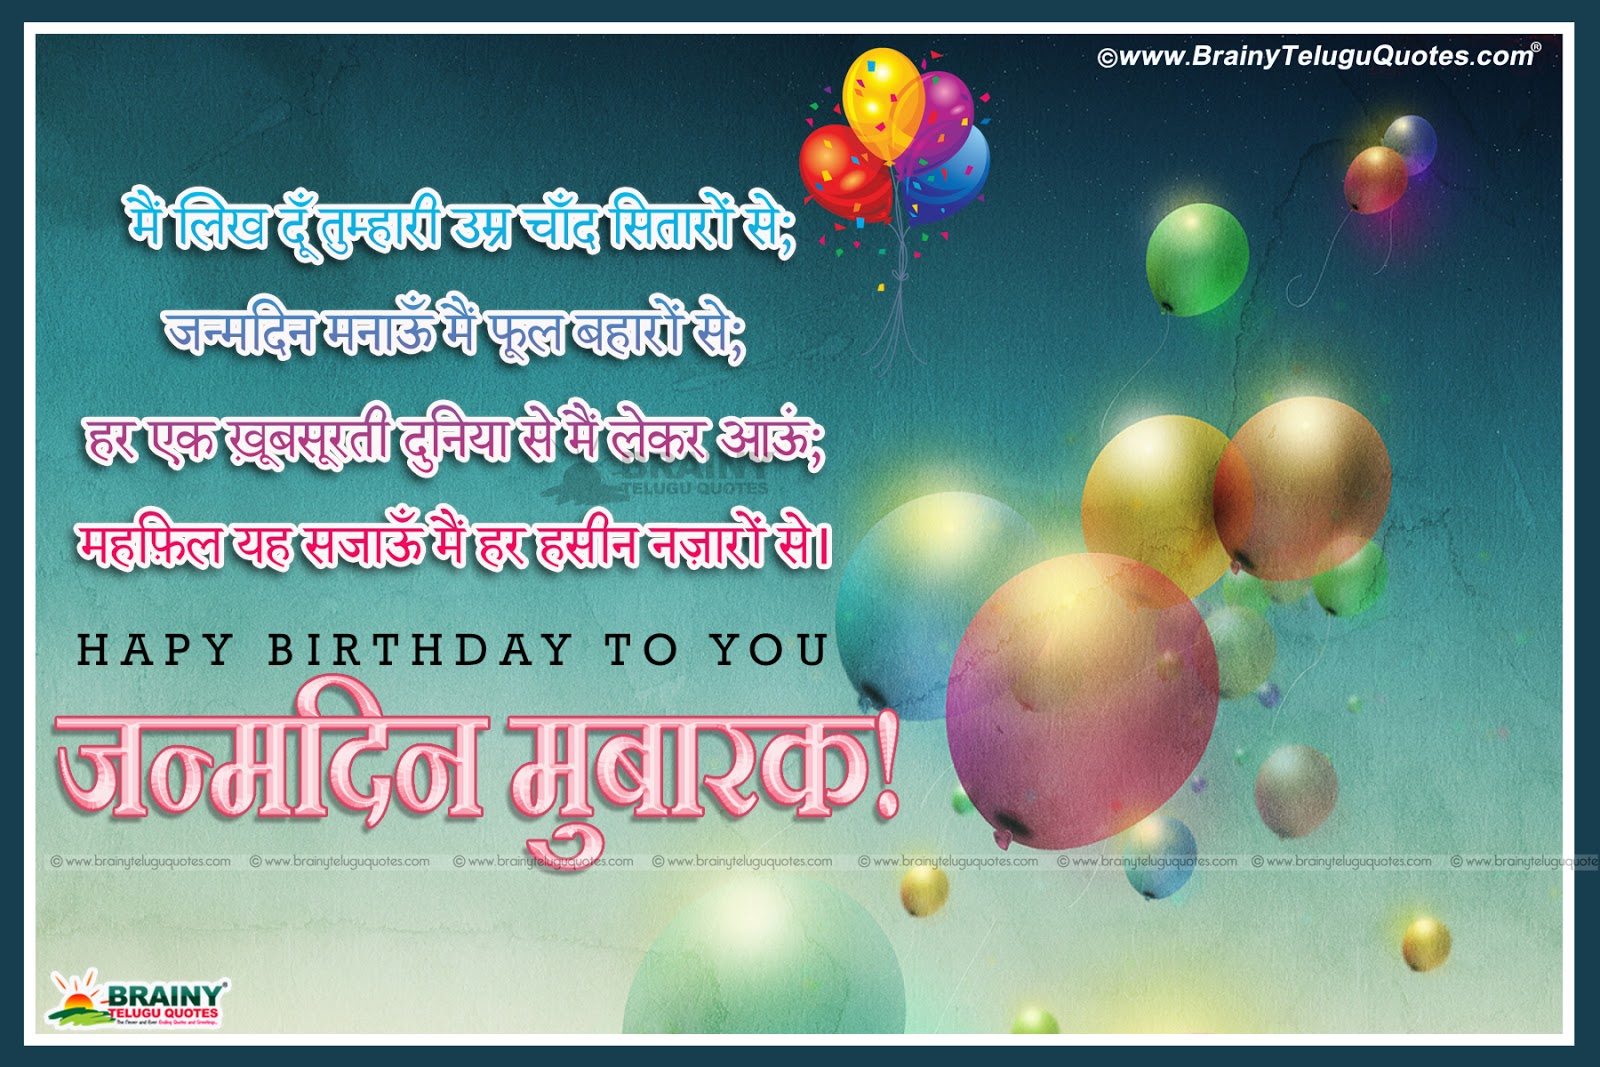 Awesome Birthday Wishes Shayari in Hindi for Friends to share Messages